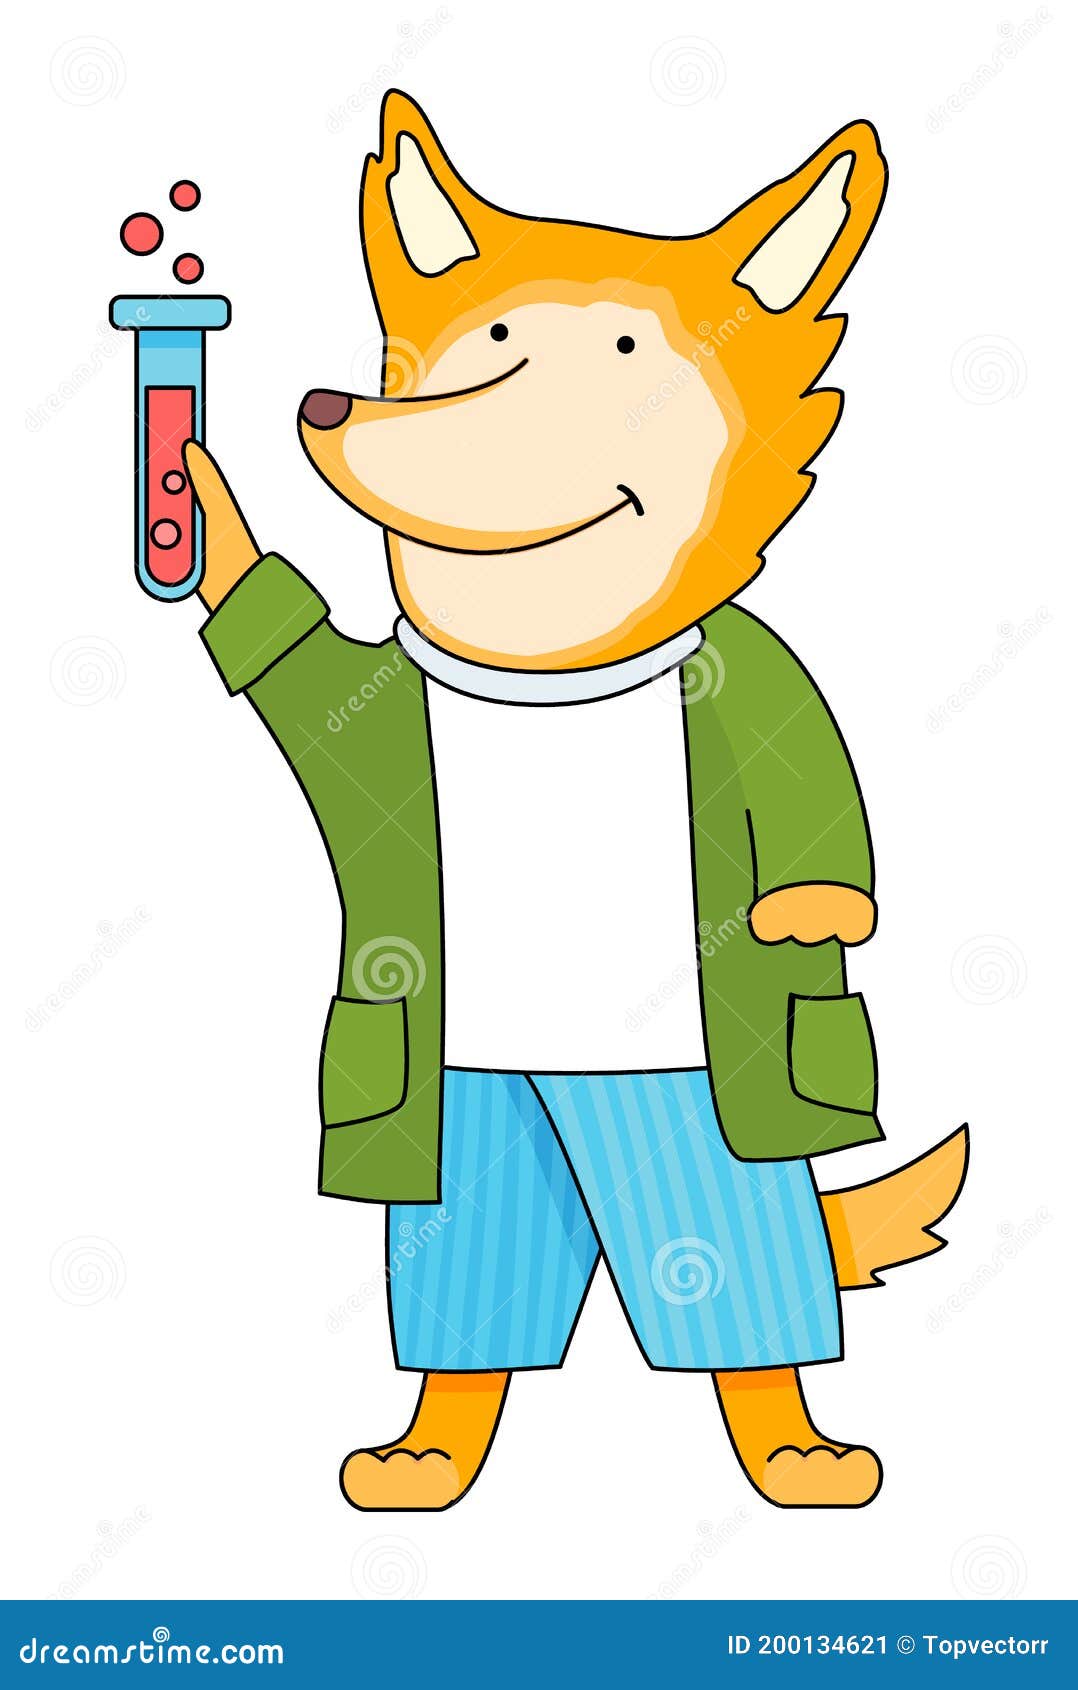 Funny Cartoon Animal Student. a Smart Fox Schoolboy with Test Tube in Hands  in Chemistry Class Stock Vector - Illustration of elementary, back:  200134621